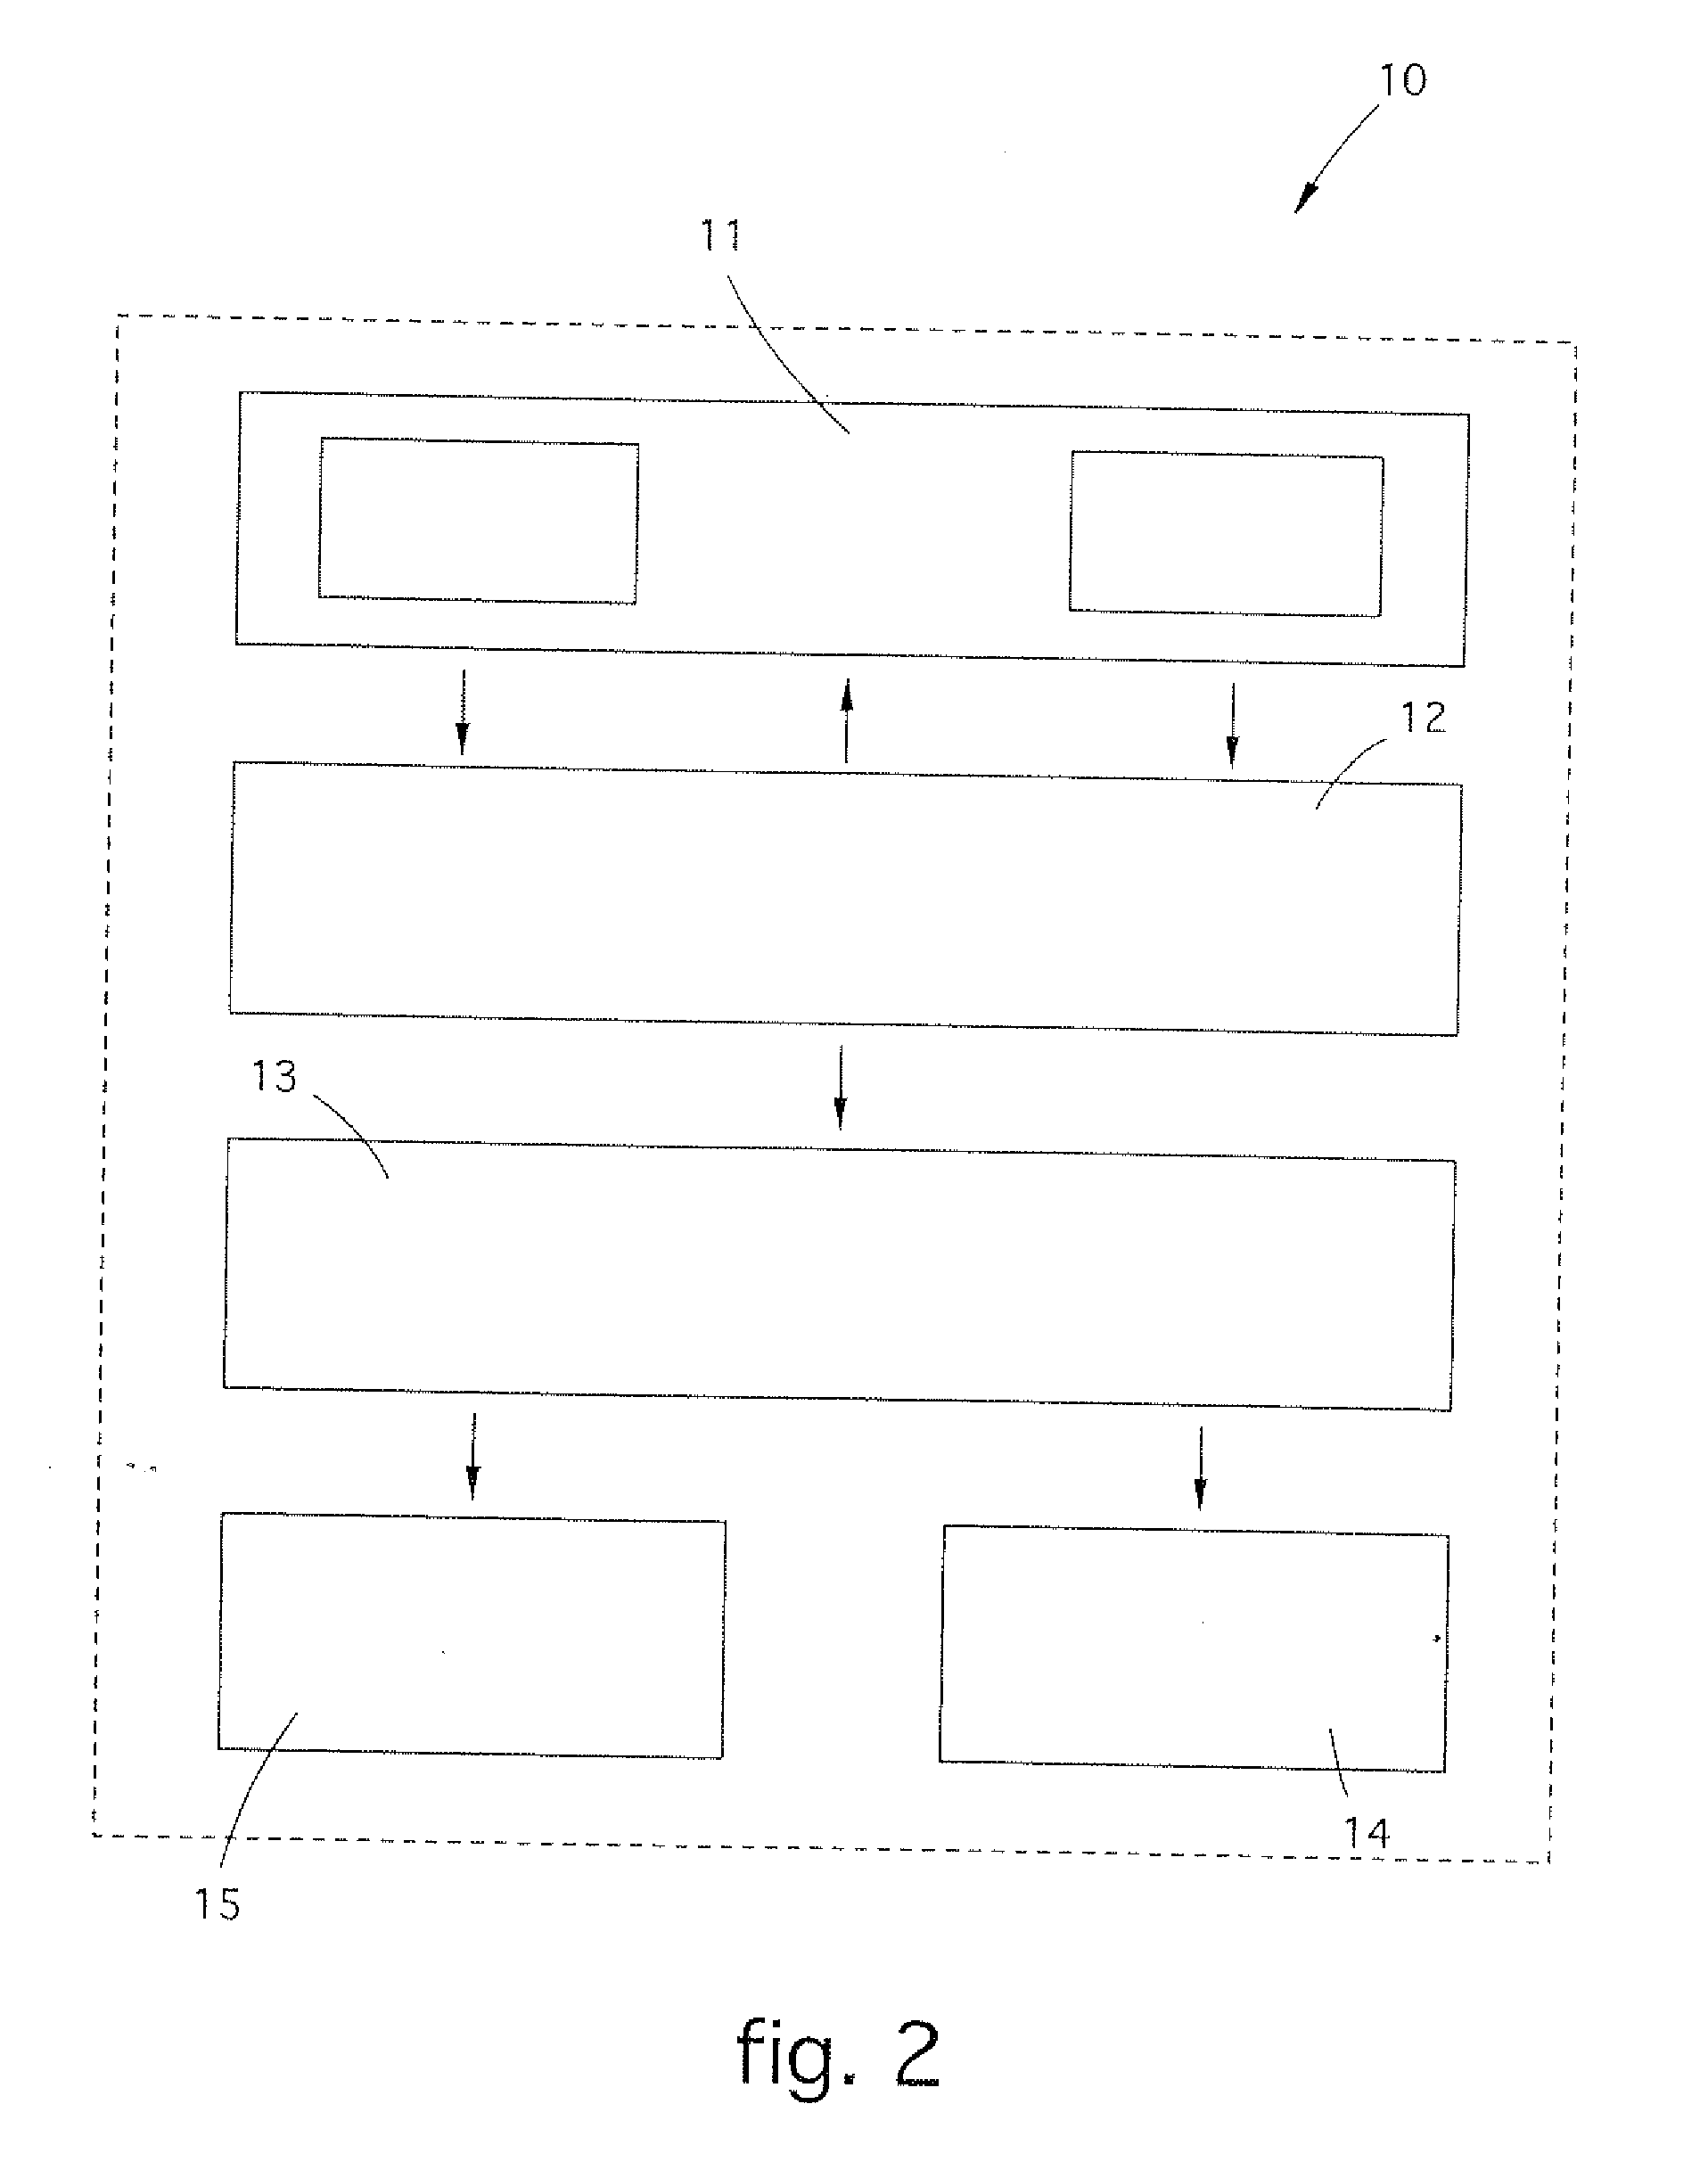 Electro-optical device for counting persons, or other, based on stereoscopic vision, and relative method